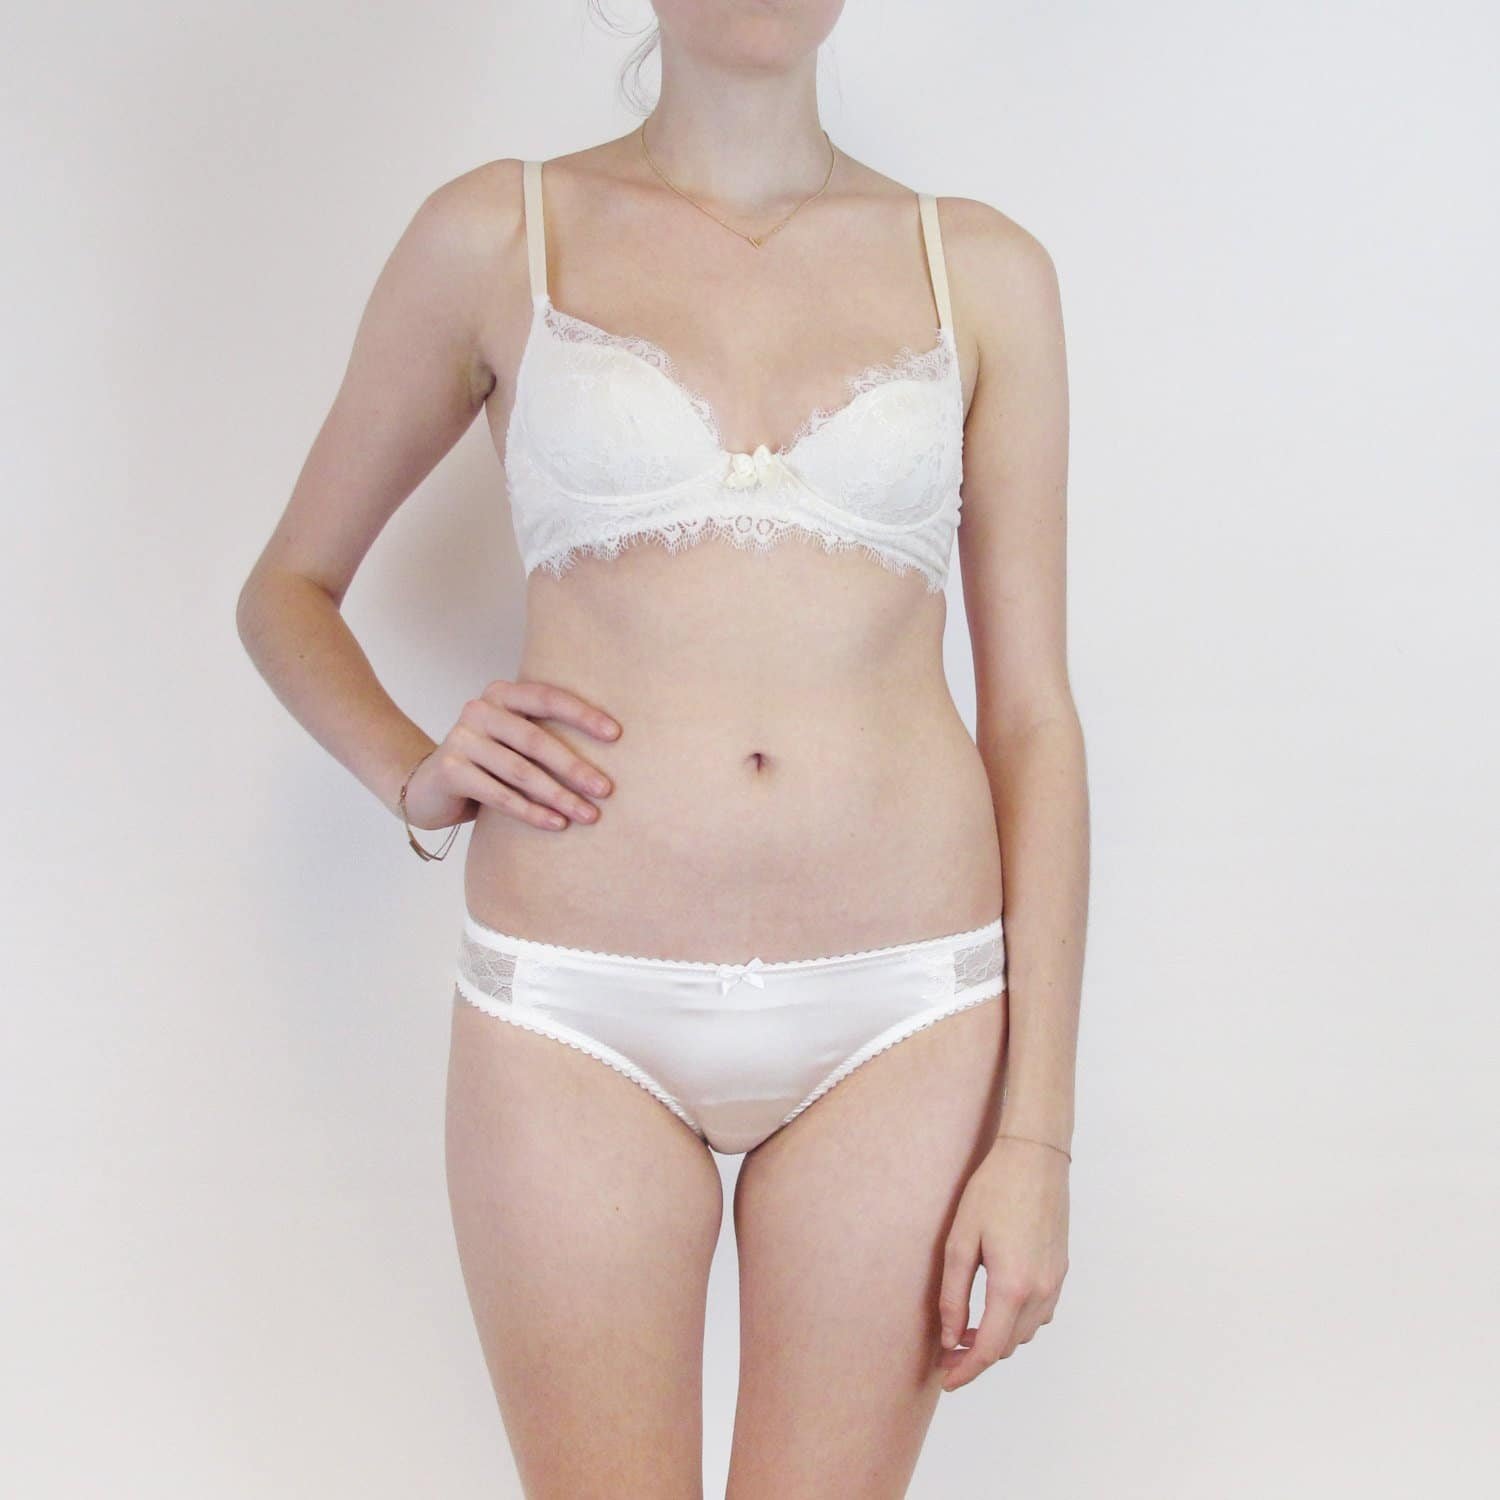 White Lace plunge lingerie set: bra and panties in off-white chantilly